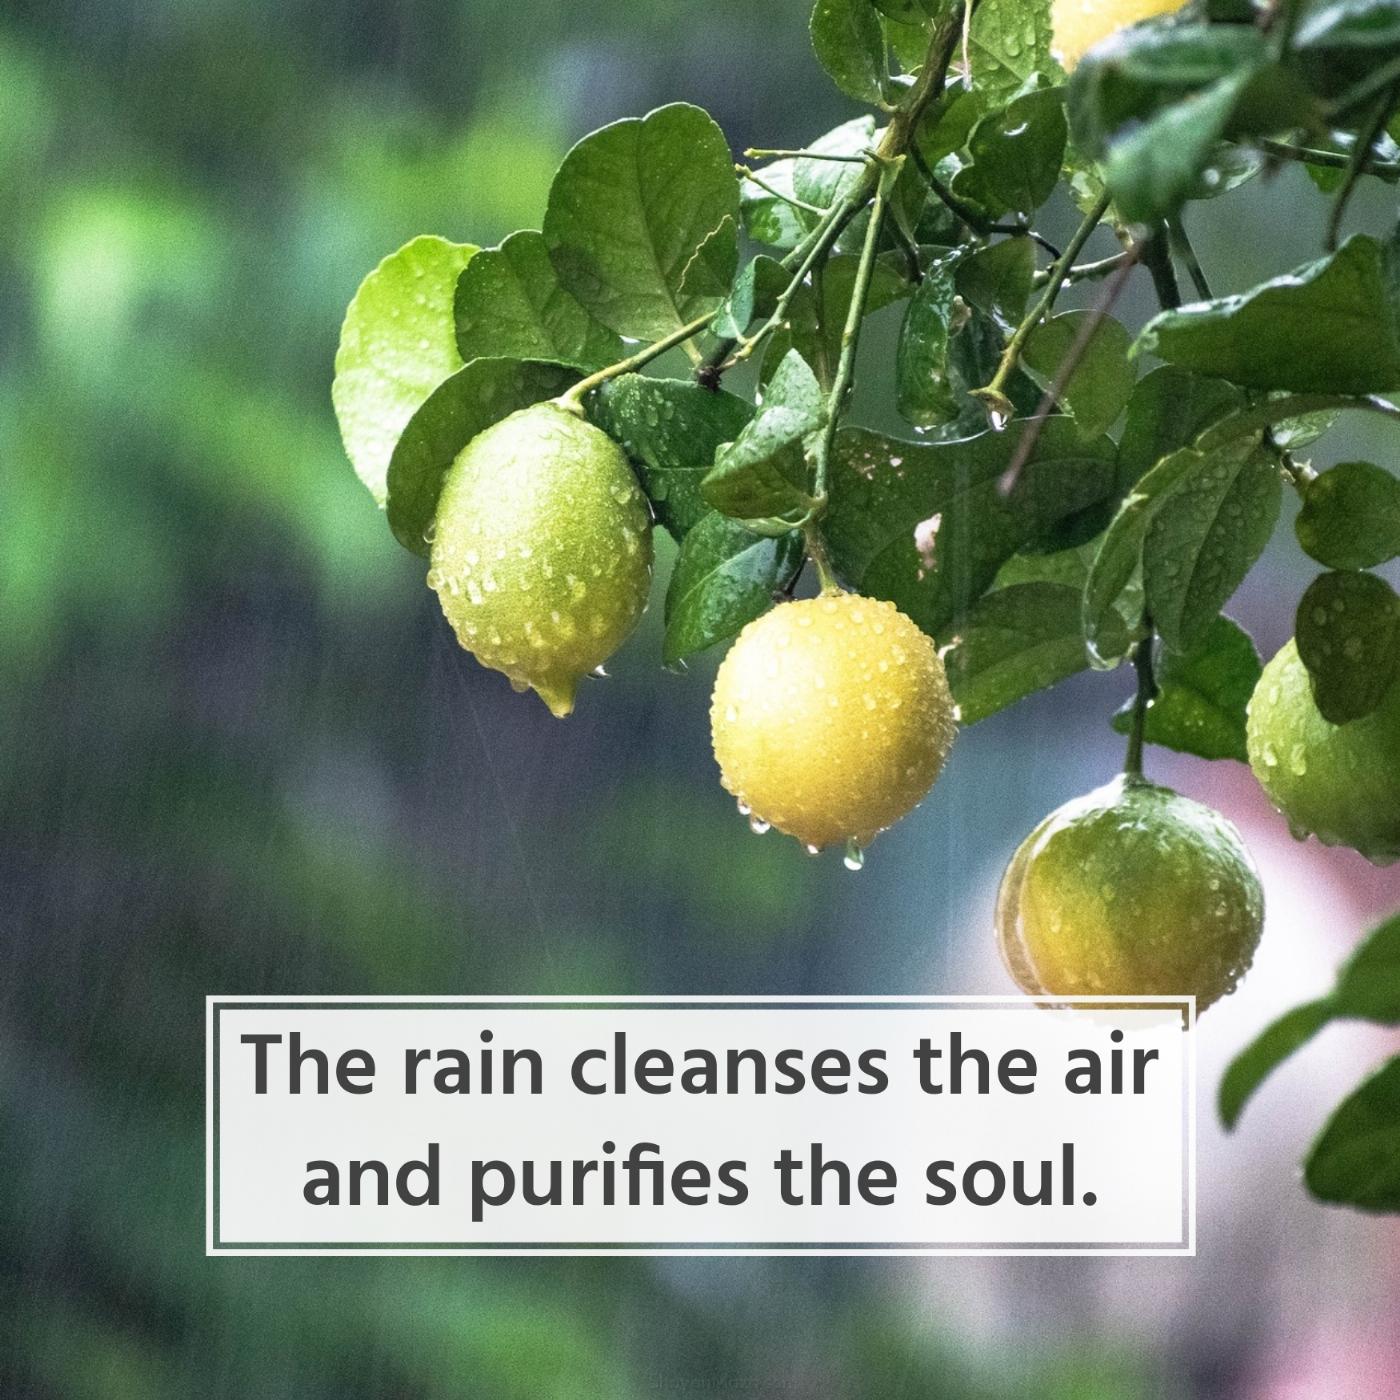 The rain cleanses the air and purifies the soul